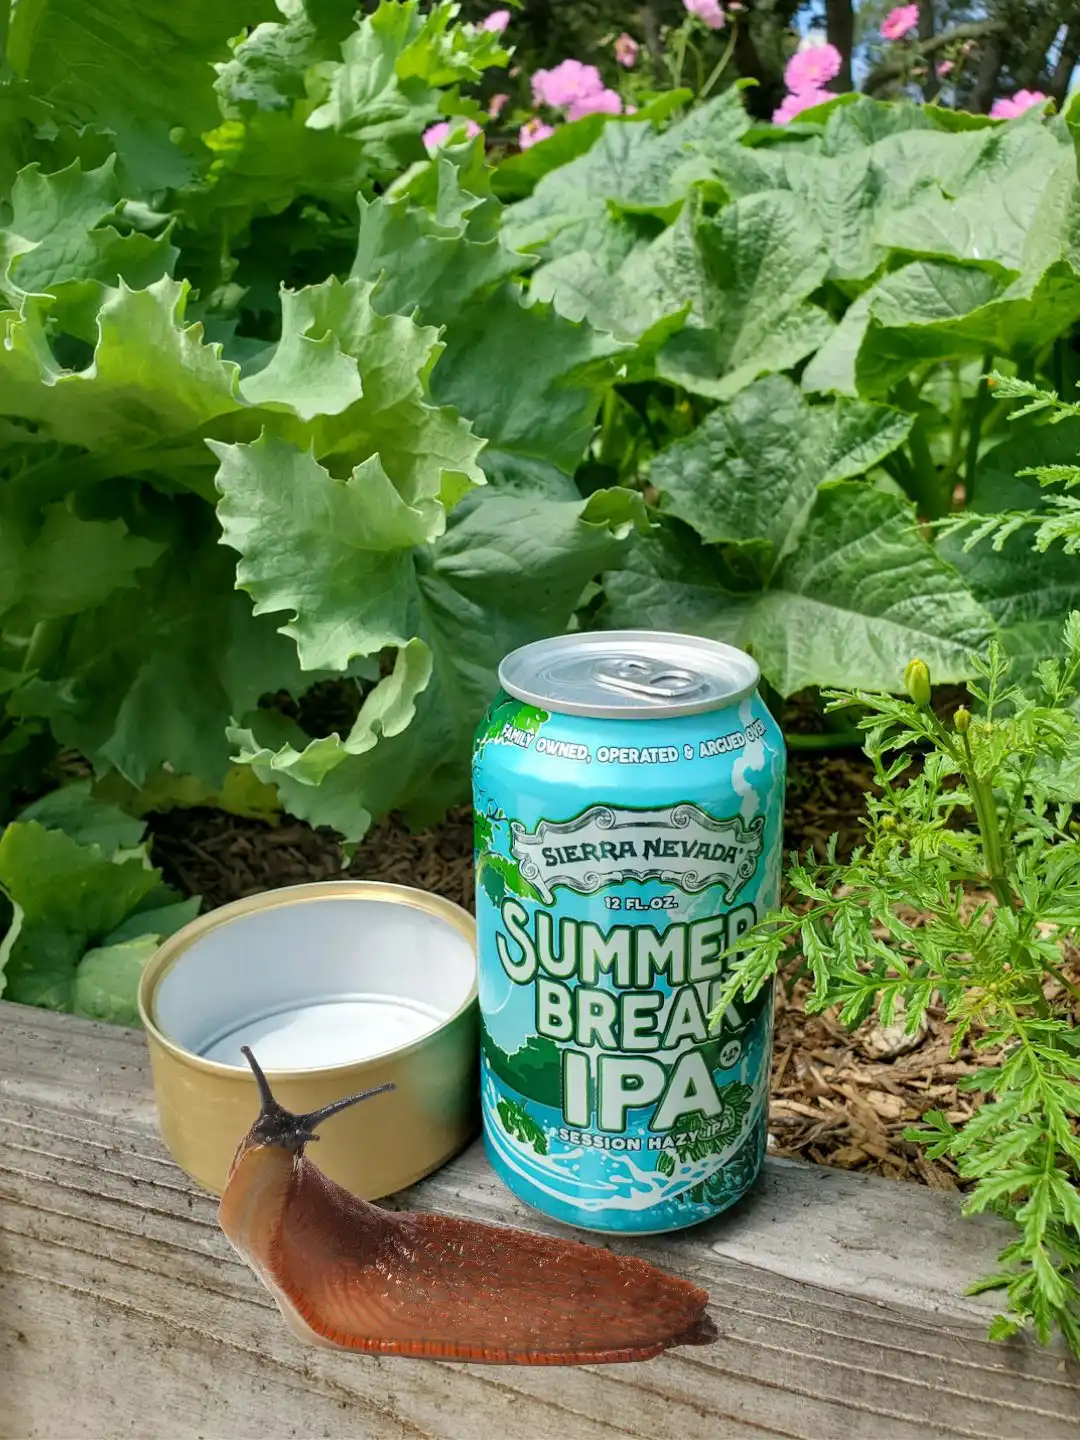 A can of beer sitting next to an empty can of cat food on the edge of a raised garden bed. Squash, poppies, marigolds, and cosmos are growing inside the bed. An image of a slug has been superimposed on the edge of the garden bed.